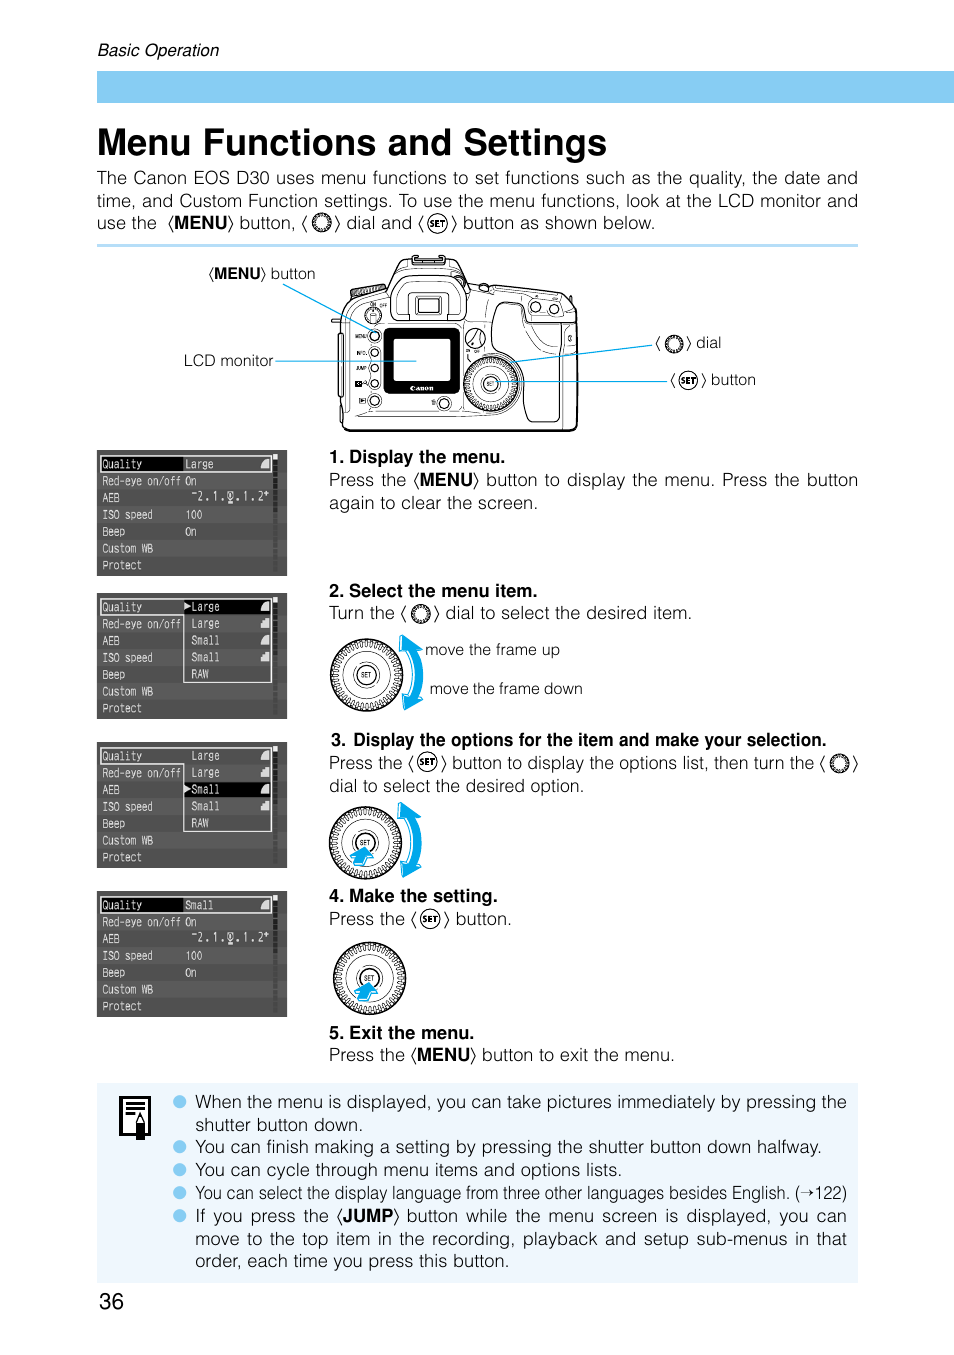 Menu functions and settings | Canon EOS D30 User Manual | Page 36 / 152